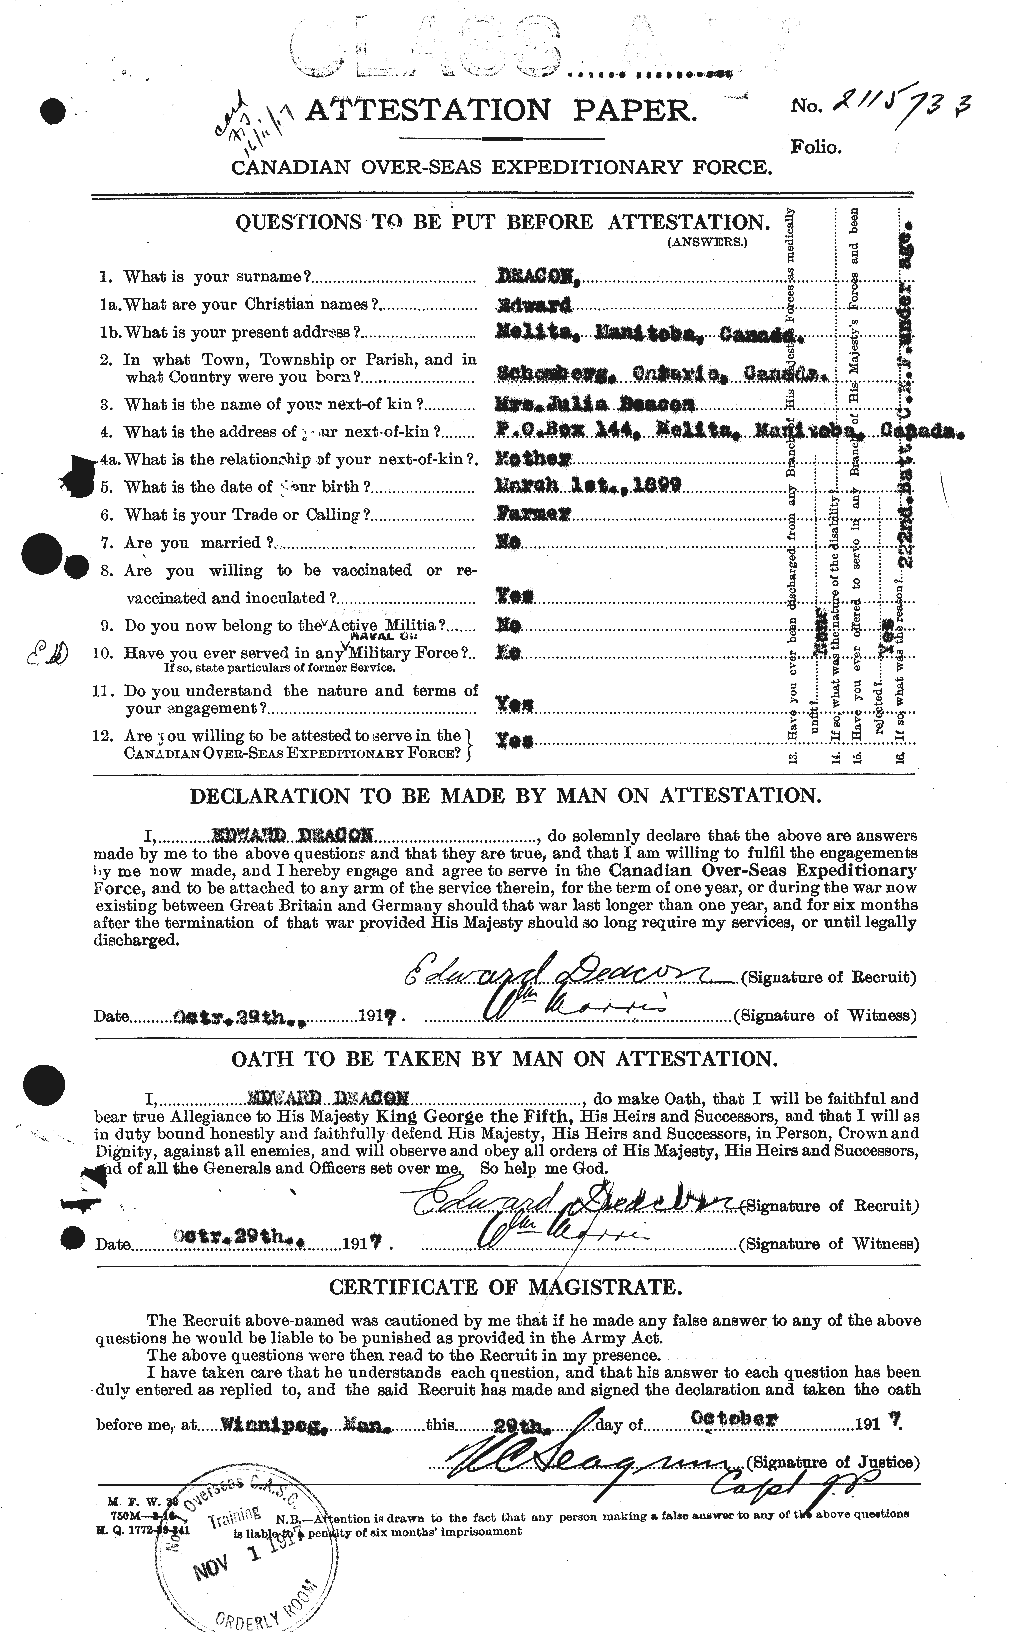 Personnel Records of the First World War - CEF 283680a